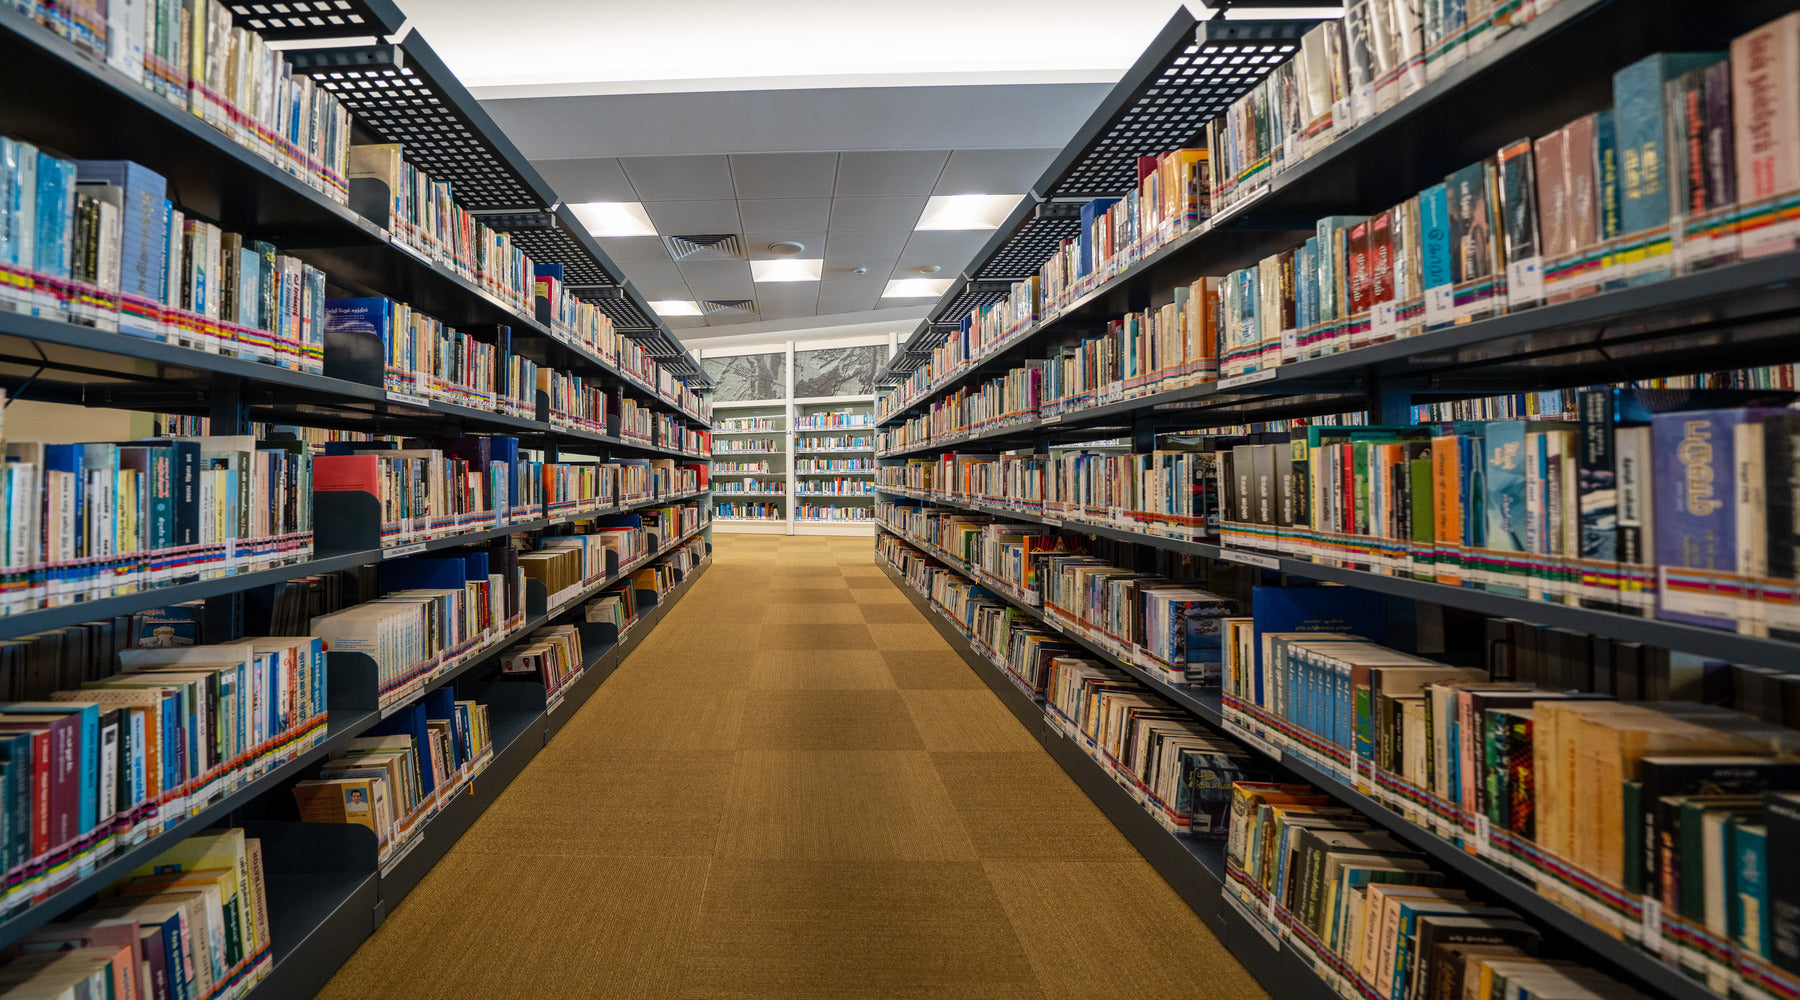 T5 LED bulbs used in drop ceiling lights in library